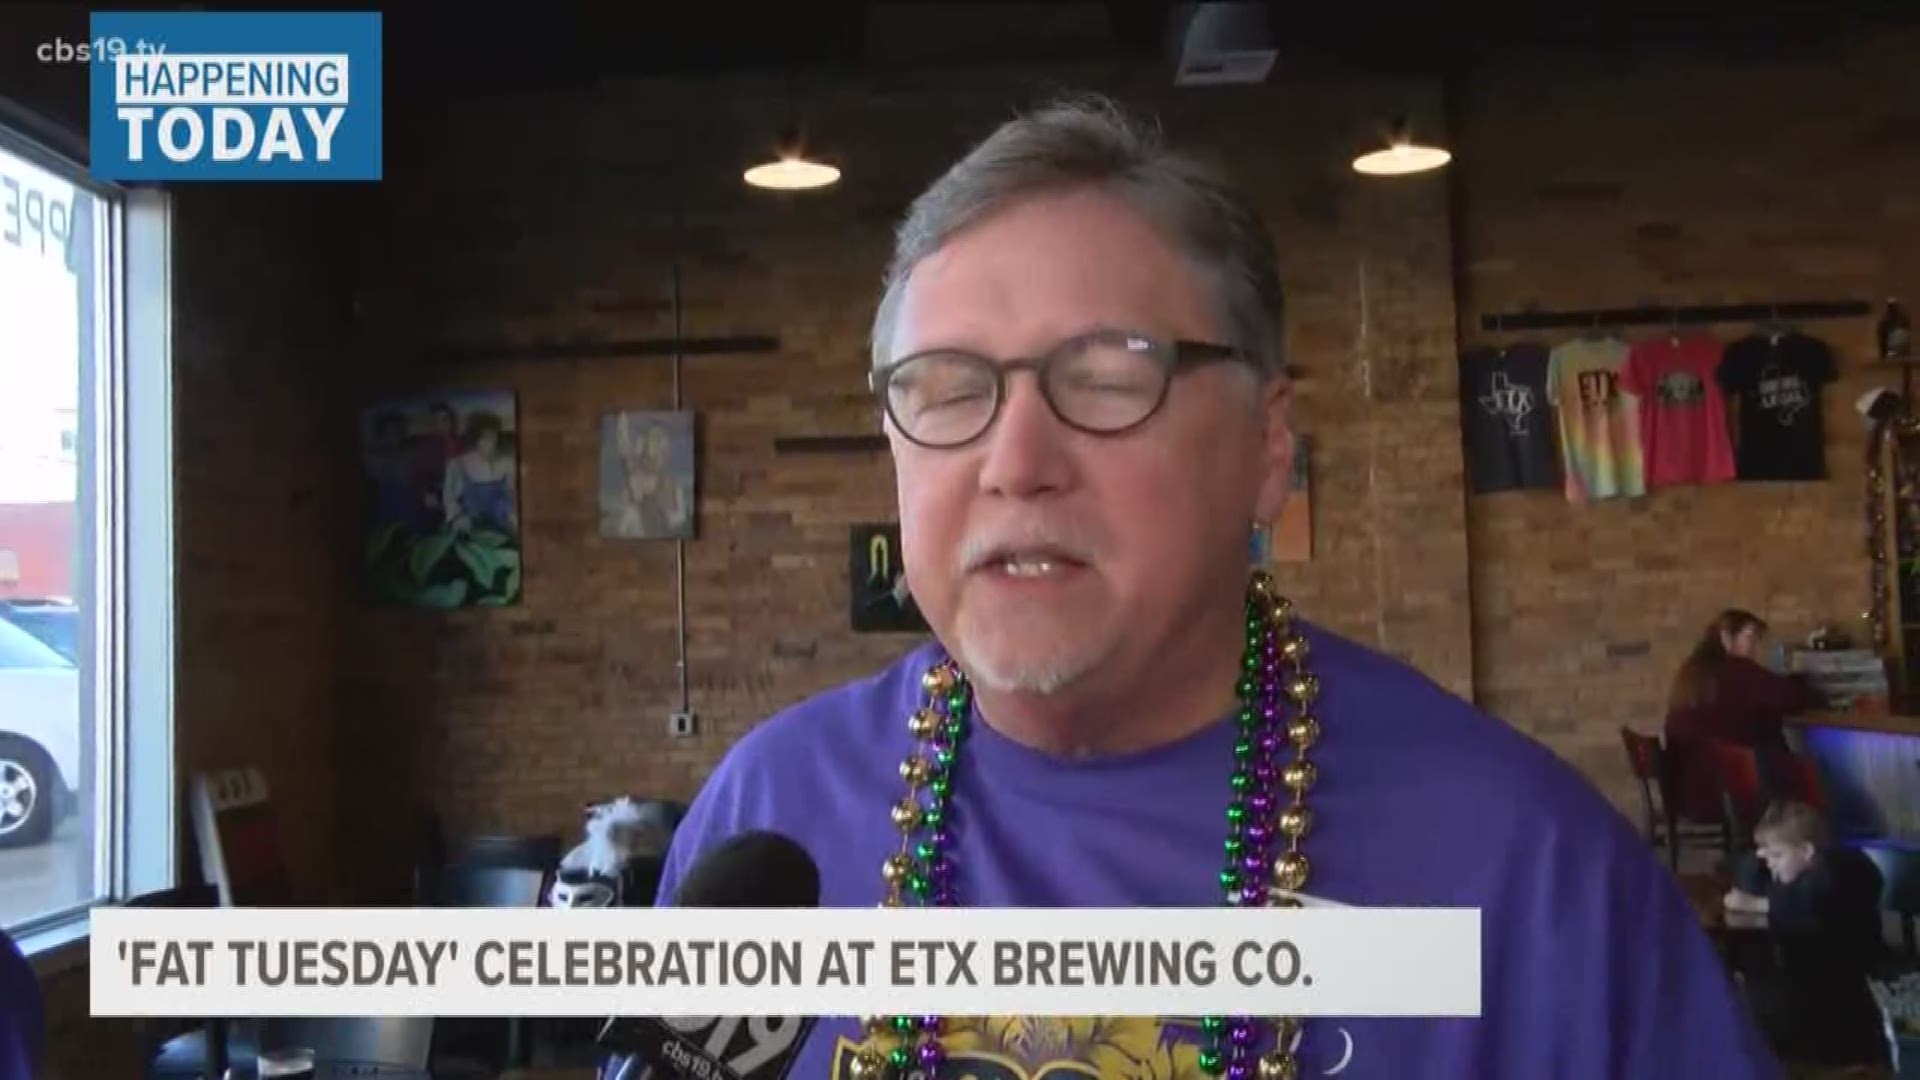 PATH hosts special Fat Tuesday fundraising party at ETX